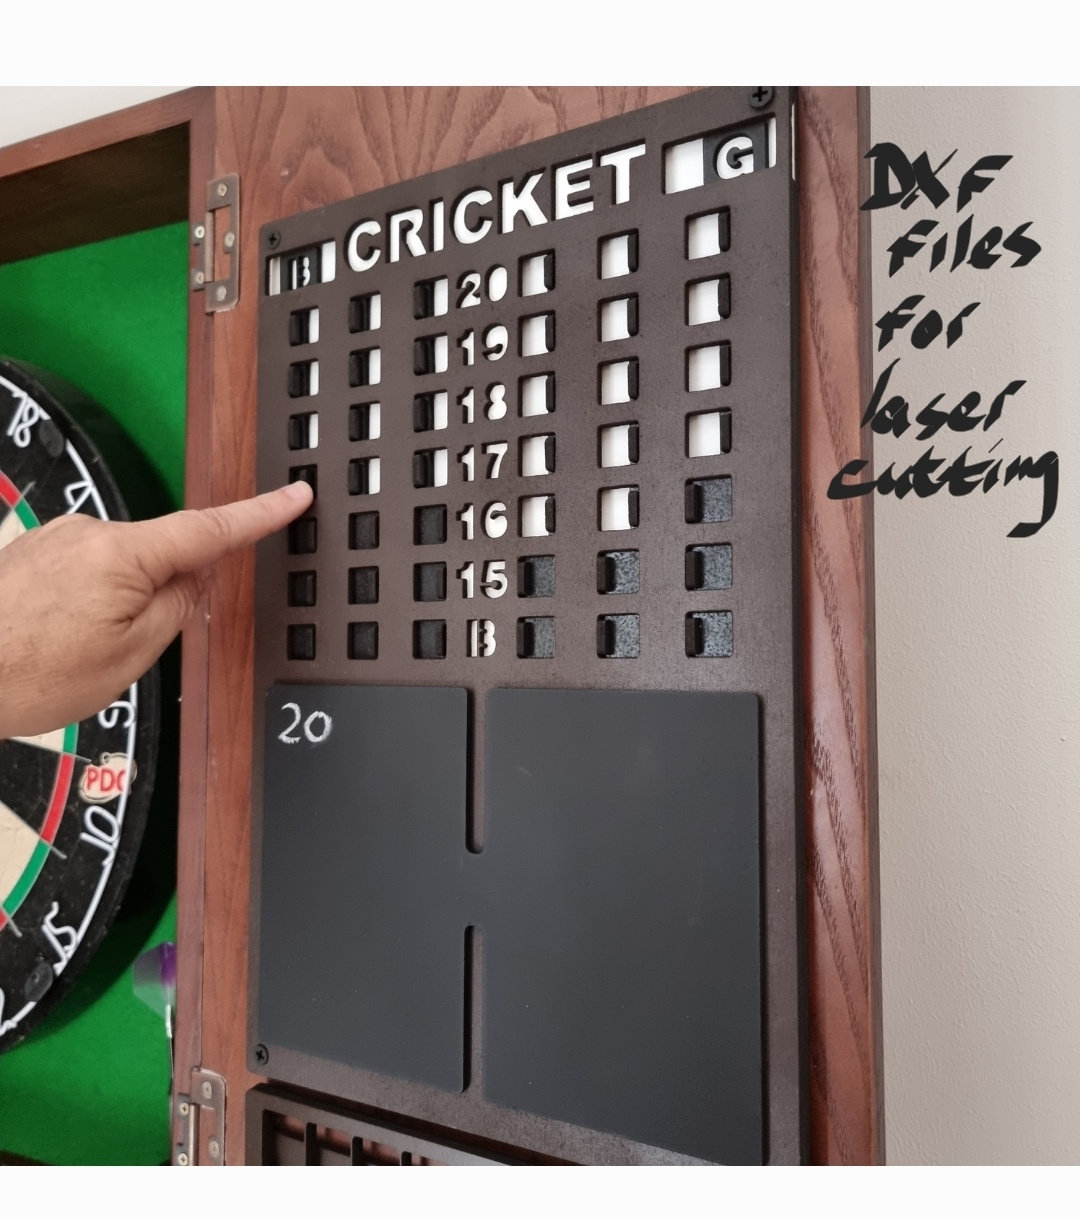 lys pære snemand Fradrage Darts Scoreboard for Cricket Dxf Files for Laser Cutting - Etsy